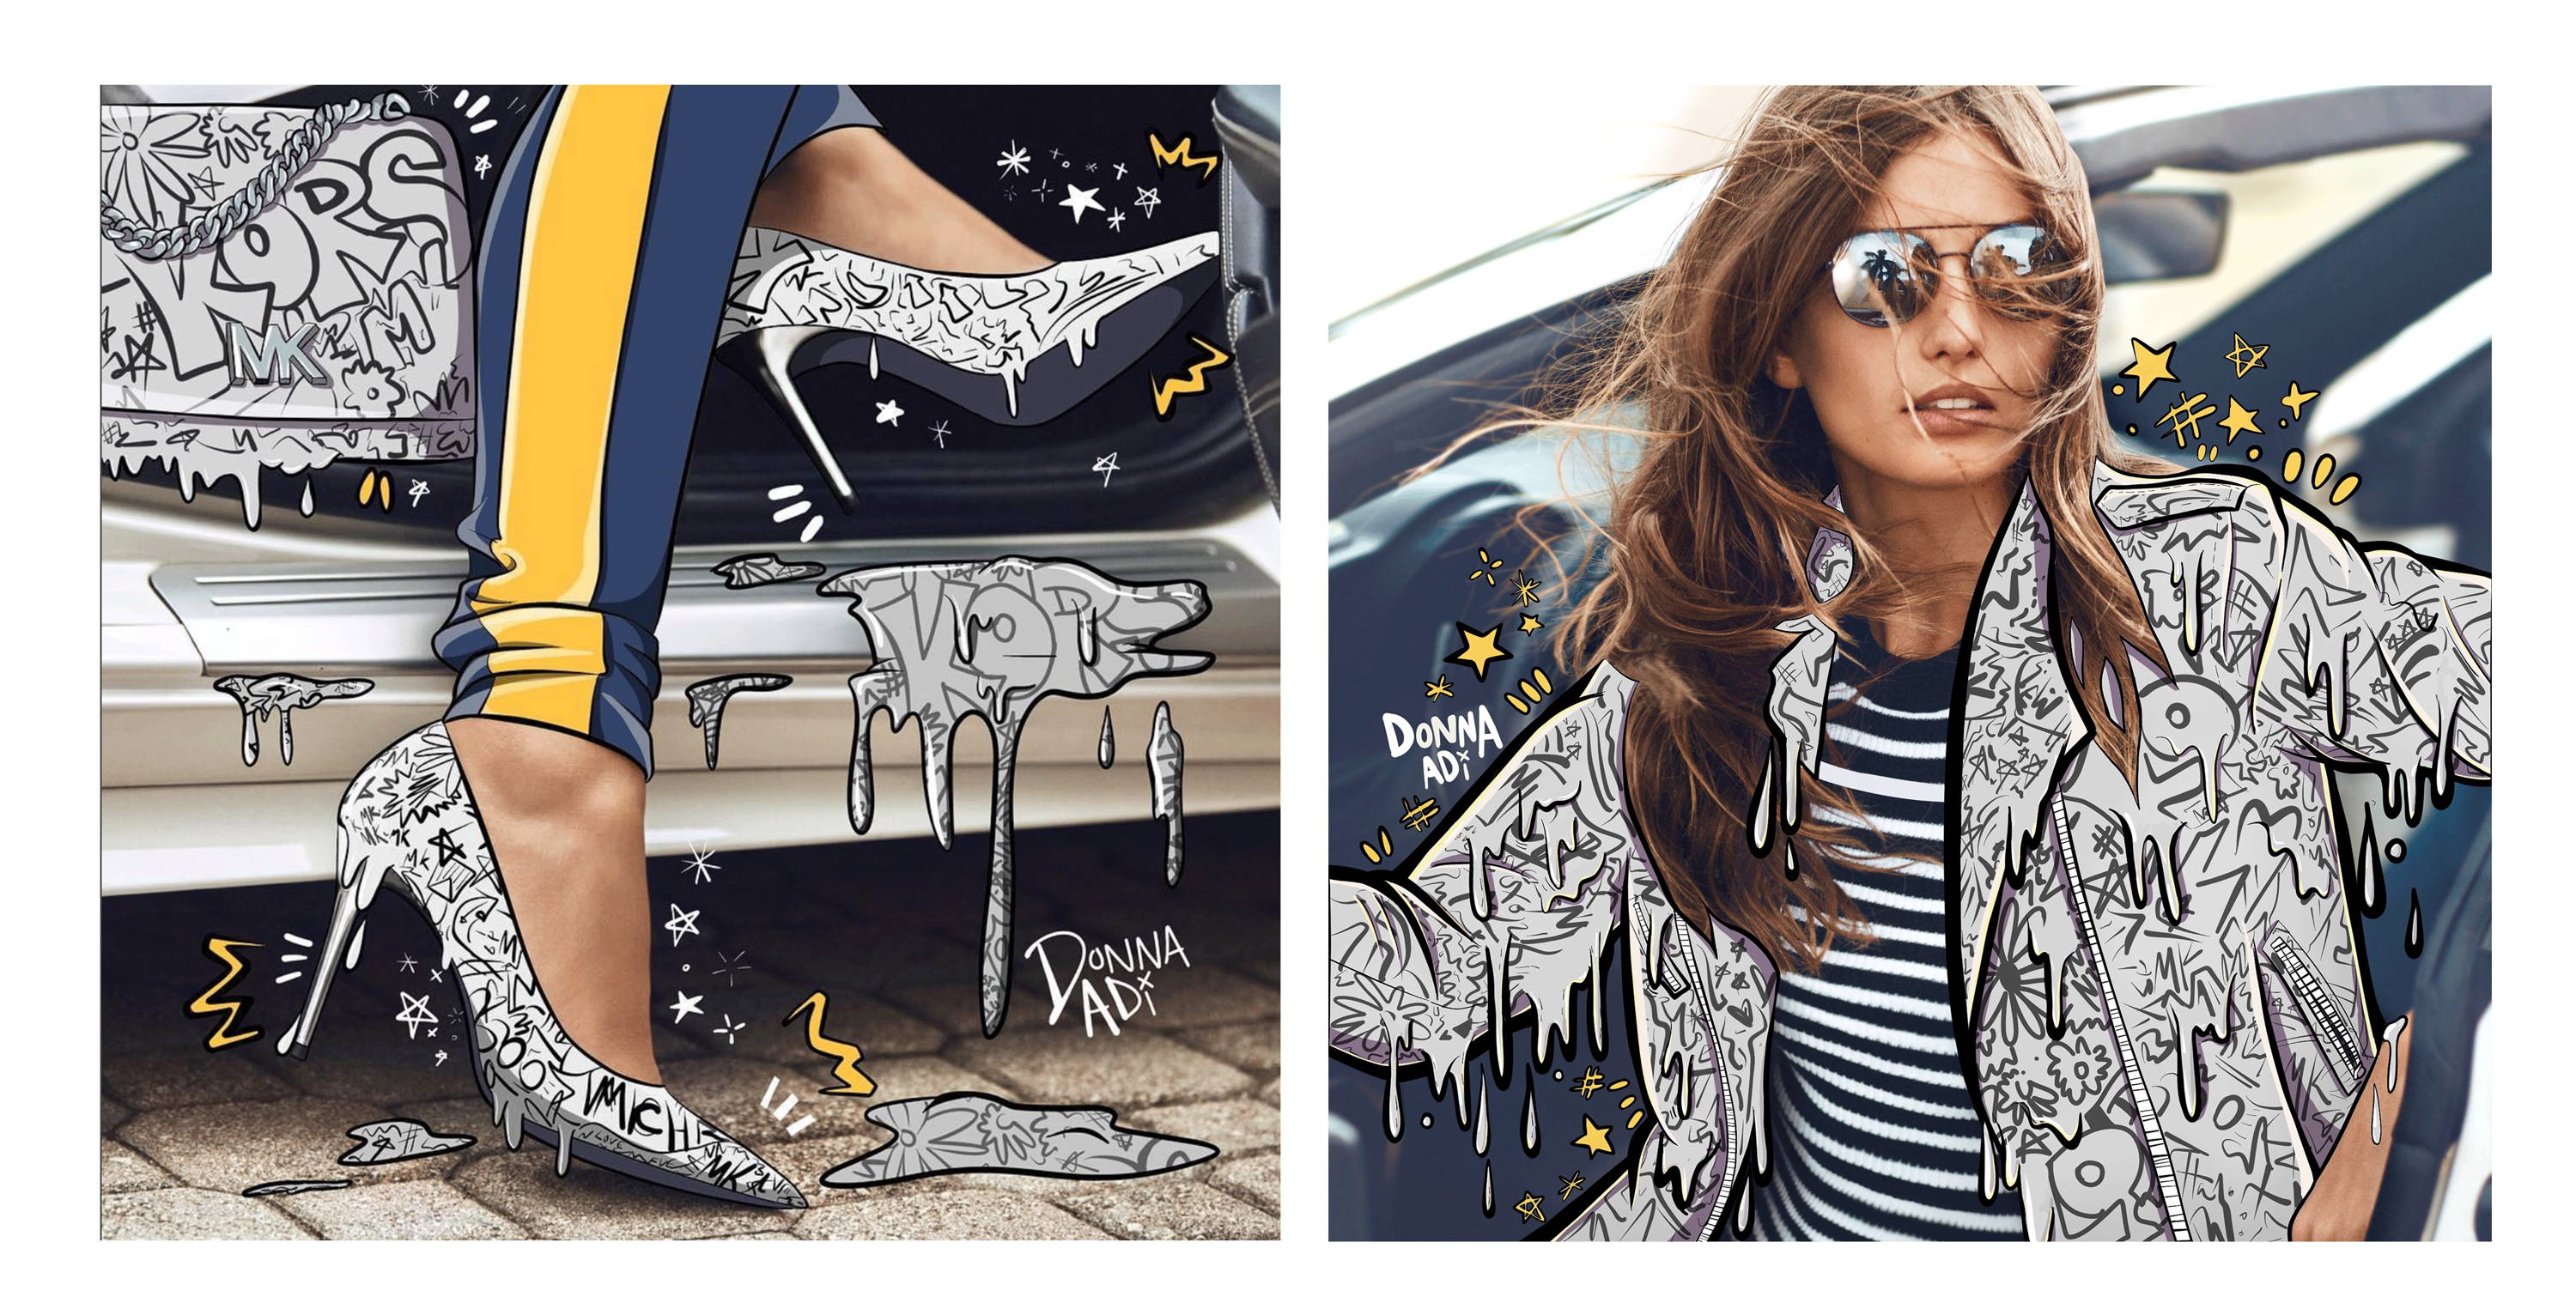 Puma New Collection Photo and Illustration by Donna Adi on Behance